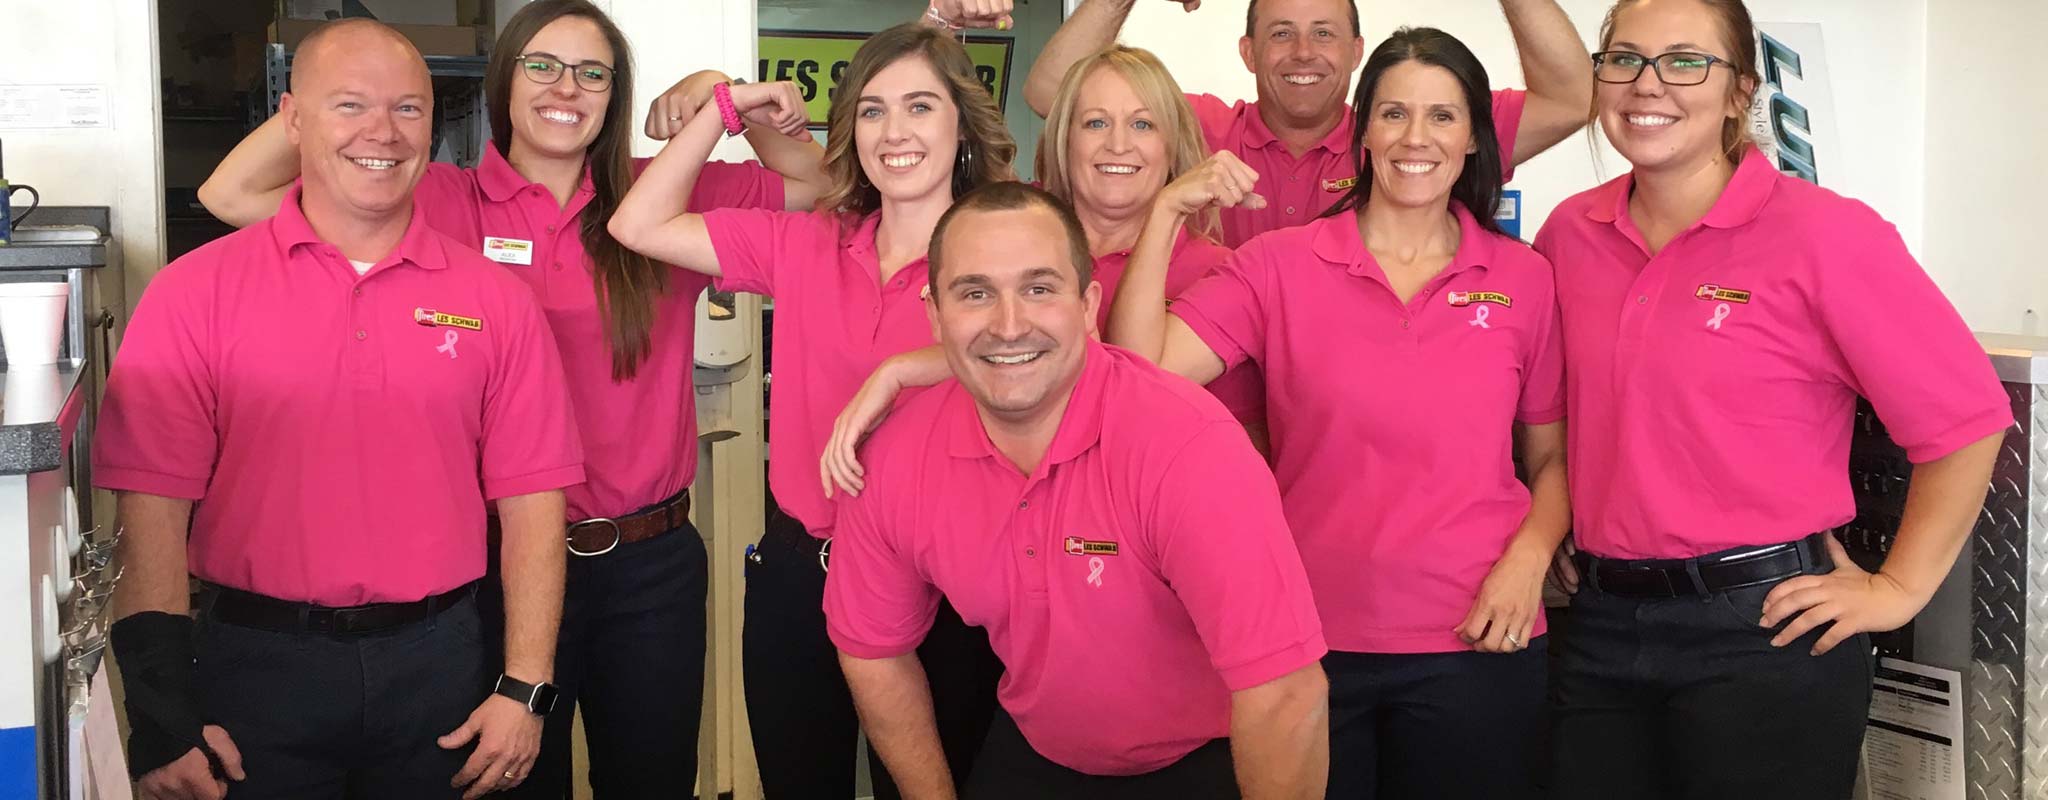 Les Schwab employees wear pink for breast cancer awareness.